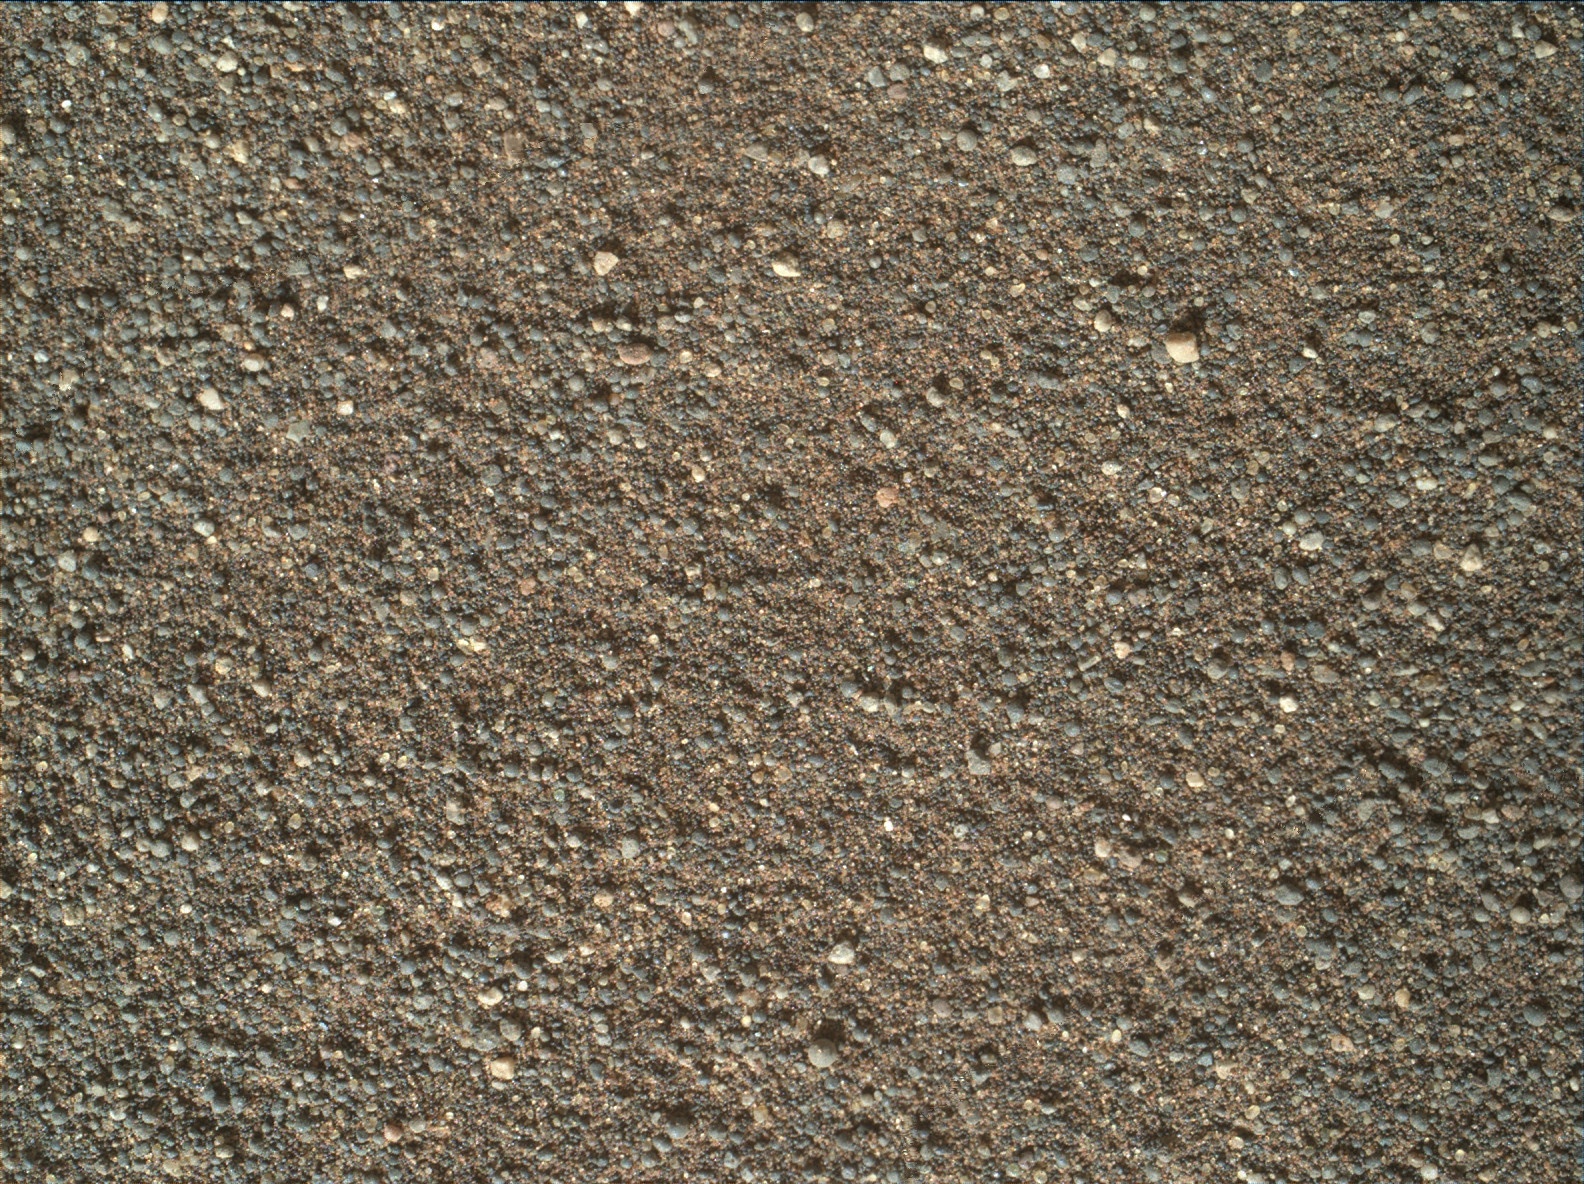 Nasa's Mars rover Curiosity acquired this image using its Mars Hand Lens Imager (MAHLI) on Sol 1751